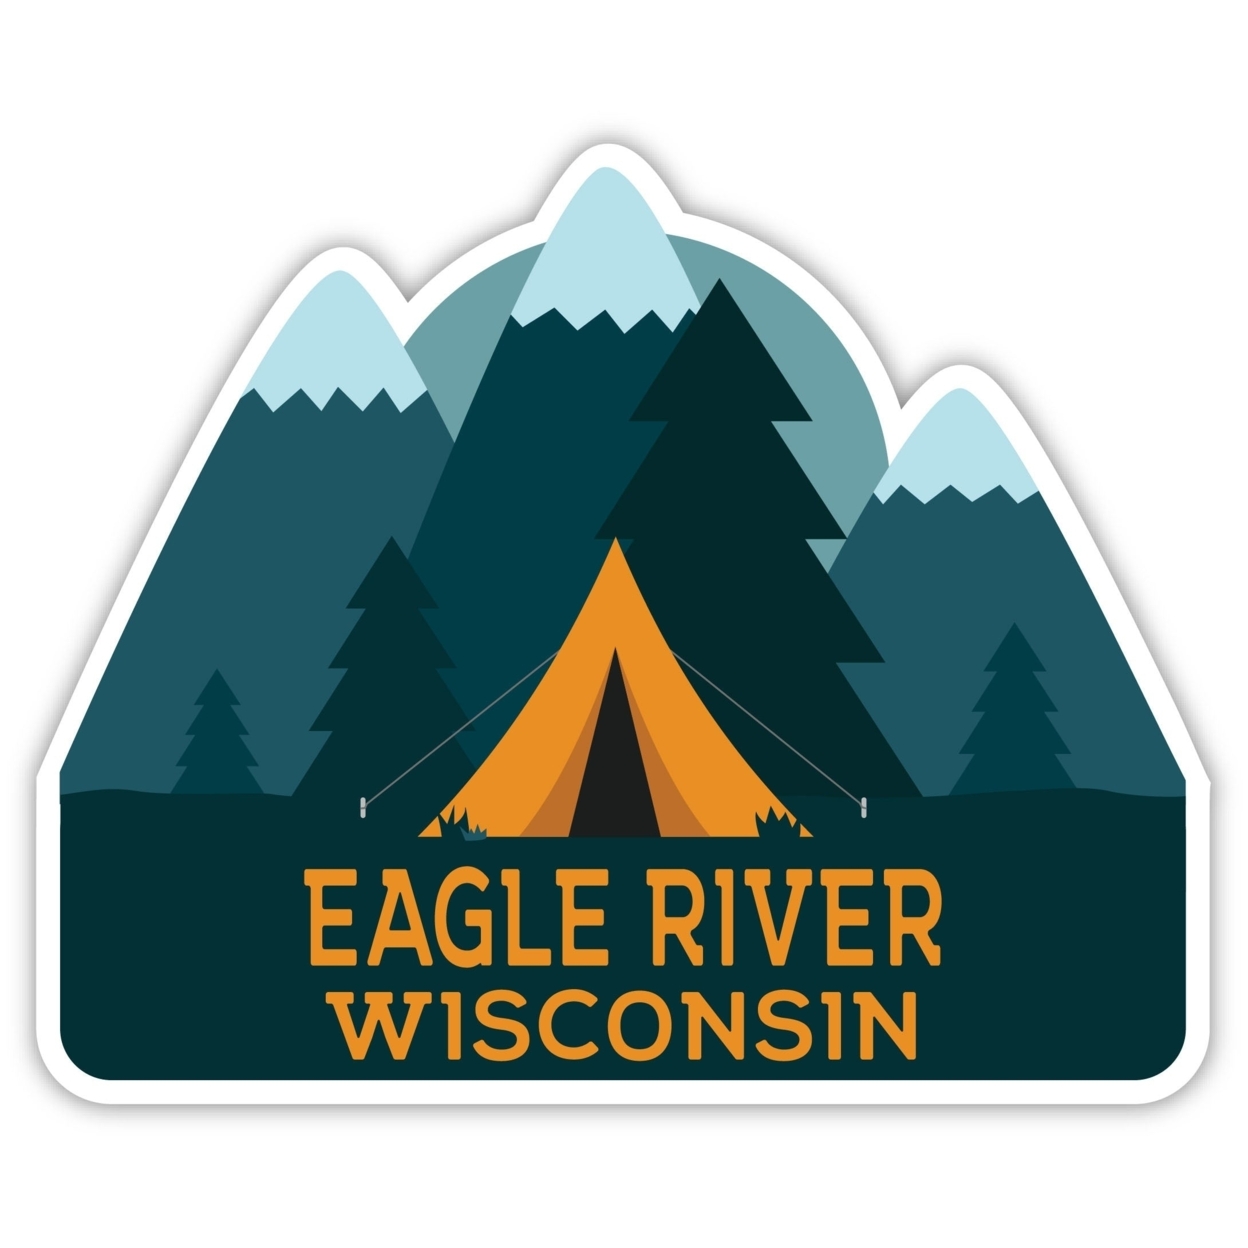 Eagle River Wisconsin Souvenir Decorative Stickers (Choose Theme And Size) - Single Unit, 6-Inch, Camp Life